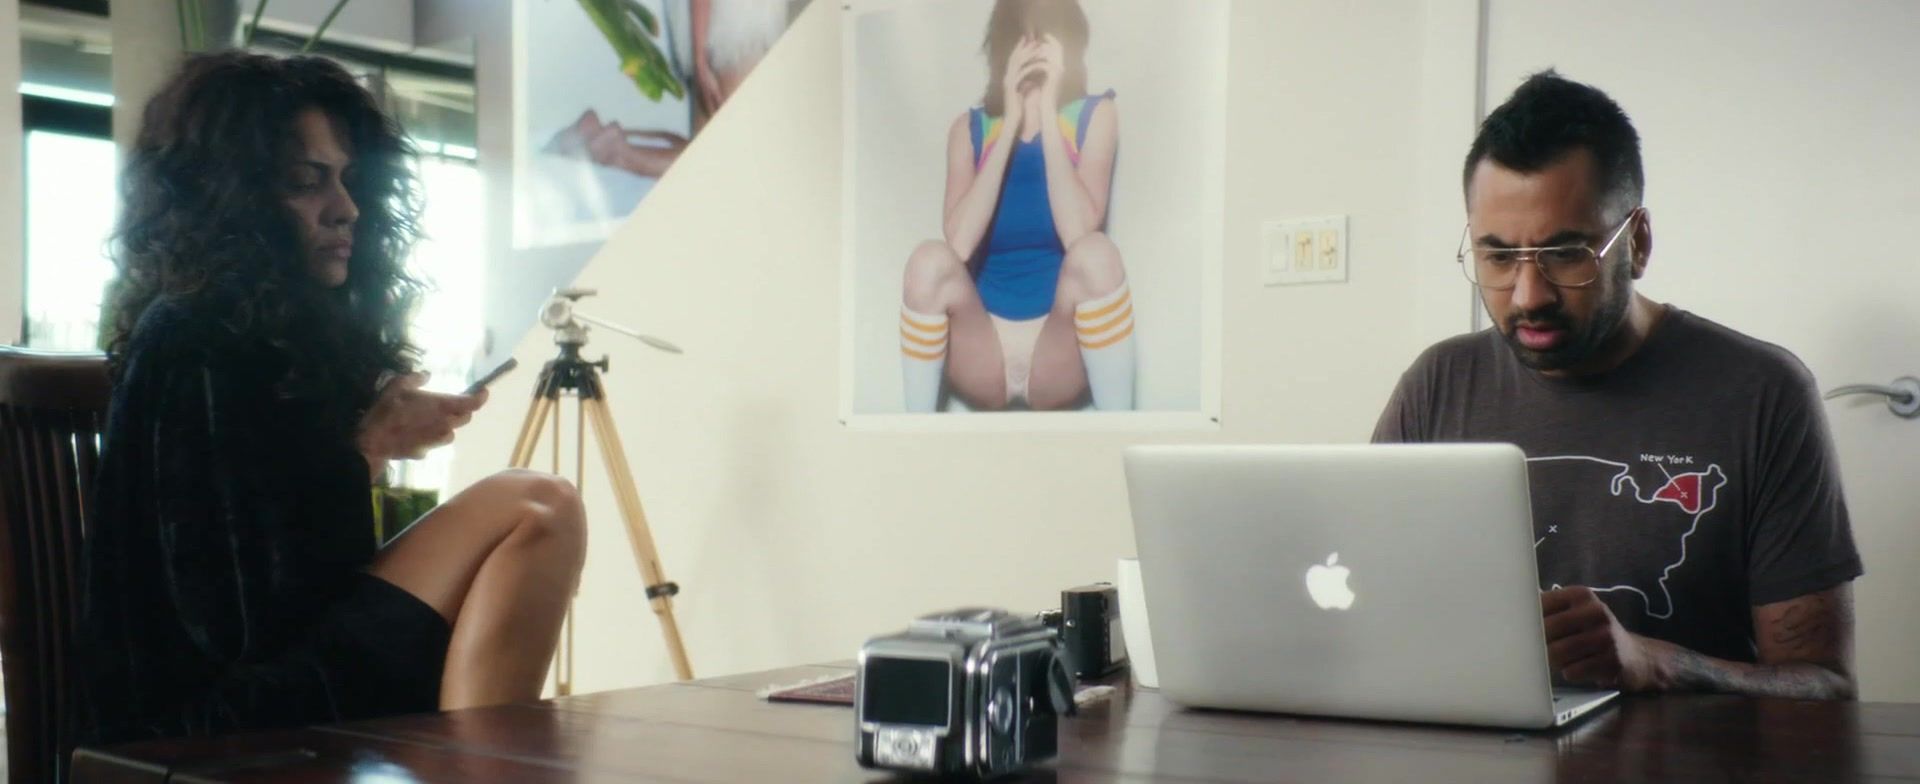 YoungPornVideos Celebs nude and sex scene | Actresses: Autumn Kendrick, Claudia Lee - The Girl In The Photographs (2015) Sesso